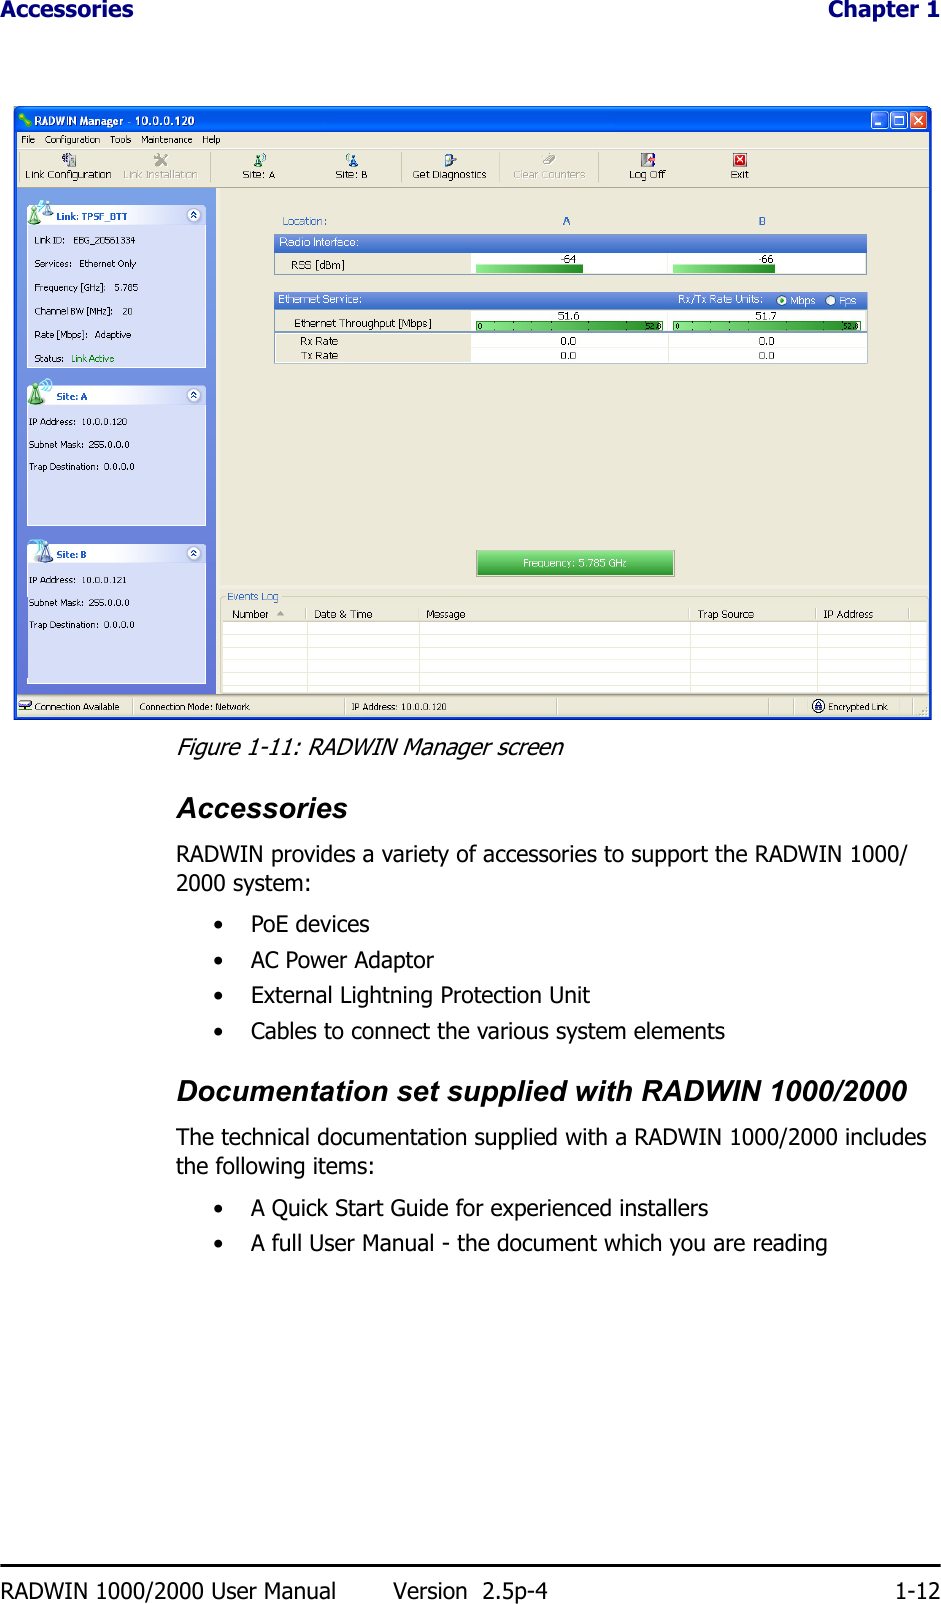 Accessories  Chapter 1RADWIN 1000/2000 User Manual Version  2.5p-4 1-12Figure 1-11: RADWIN Manager screenAccessoriesRADWIN provides a variety of accessories to support the RADWIN 1000/2000 system:•PoE devices•AC Power Adaptor• External Lightning Protection Unit• Cables to connect the various system elementsDocumentation set supplied with RADWIN 1000/2000The technical documentation supplied with a RADWIN 1000/2000 includes the following items:• A Quick Start Guide for experienced installers• A full User Manual - the document which you are reading